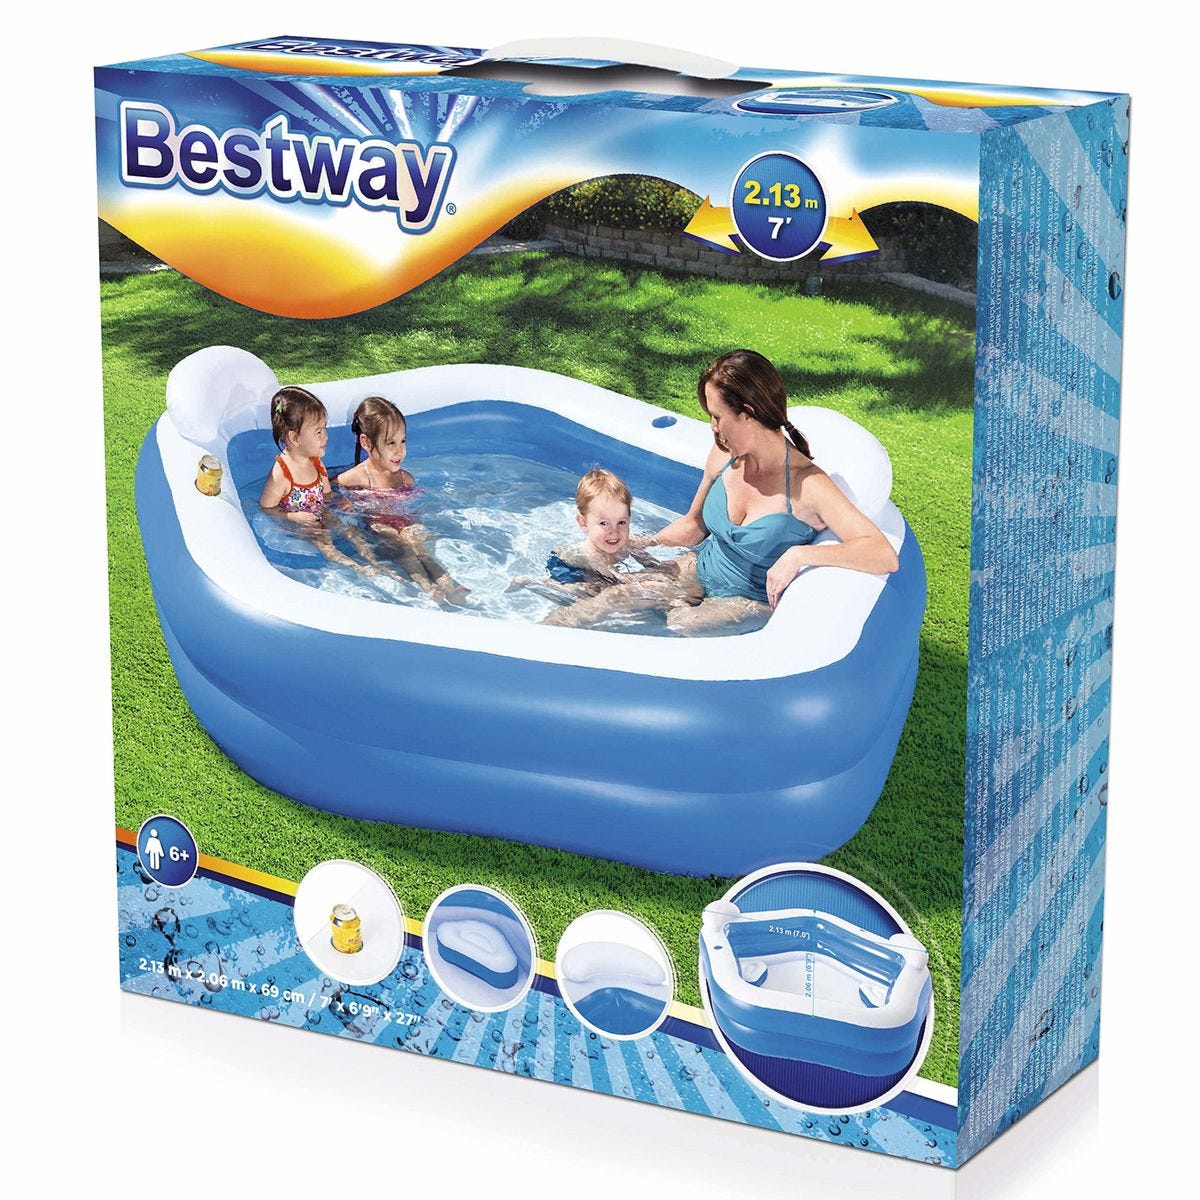 The role of inflatable pools in promoting inclusivity and accessibility